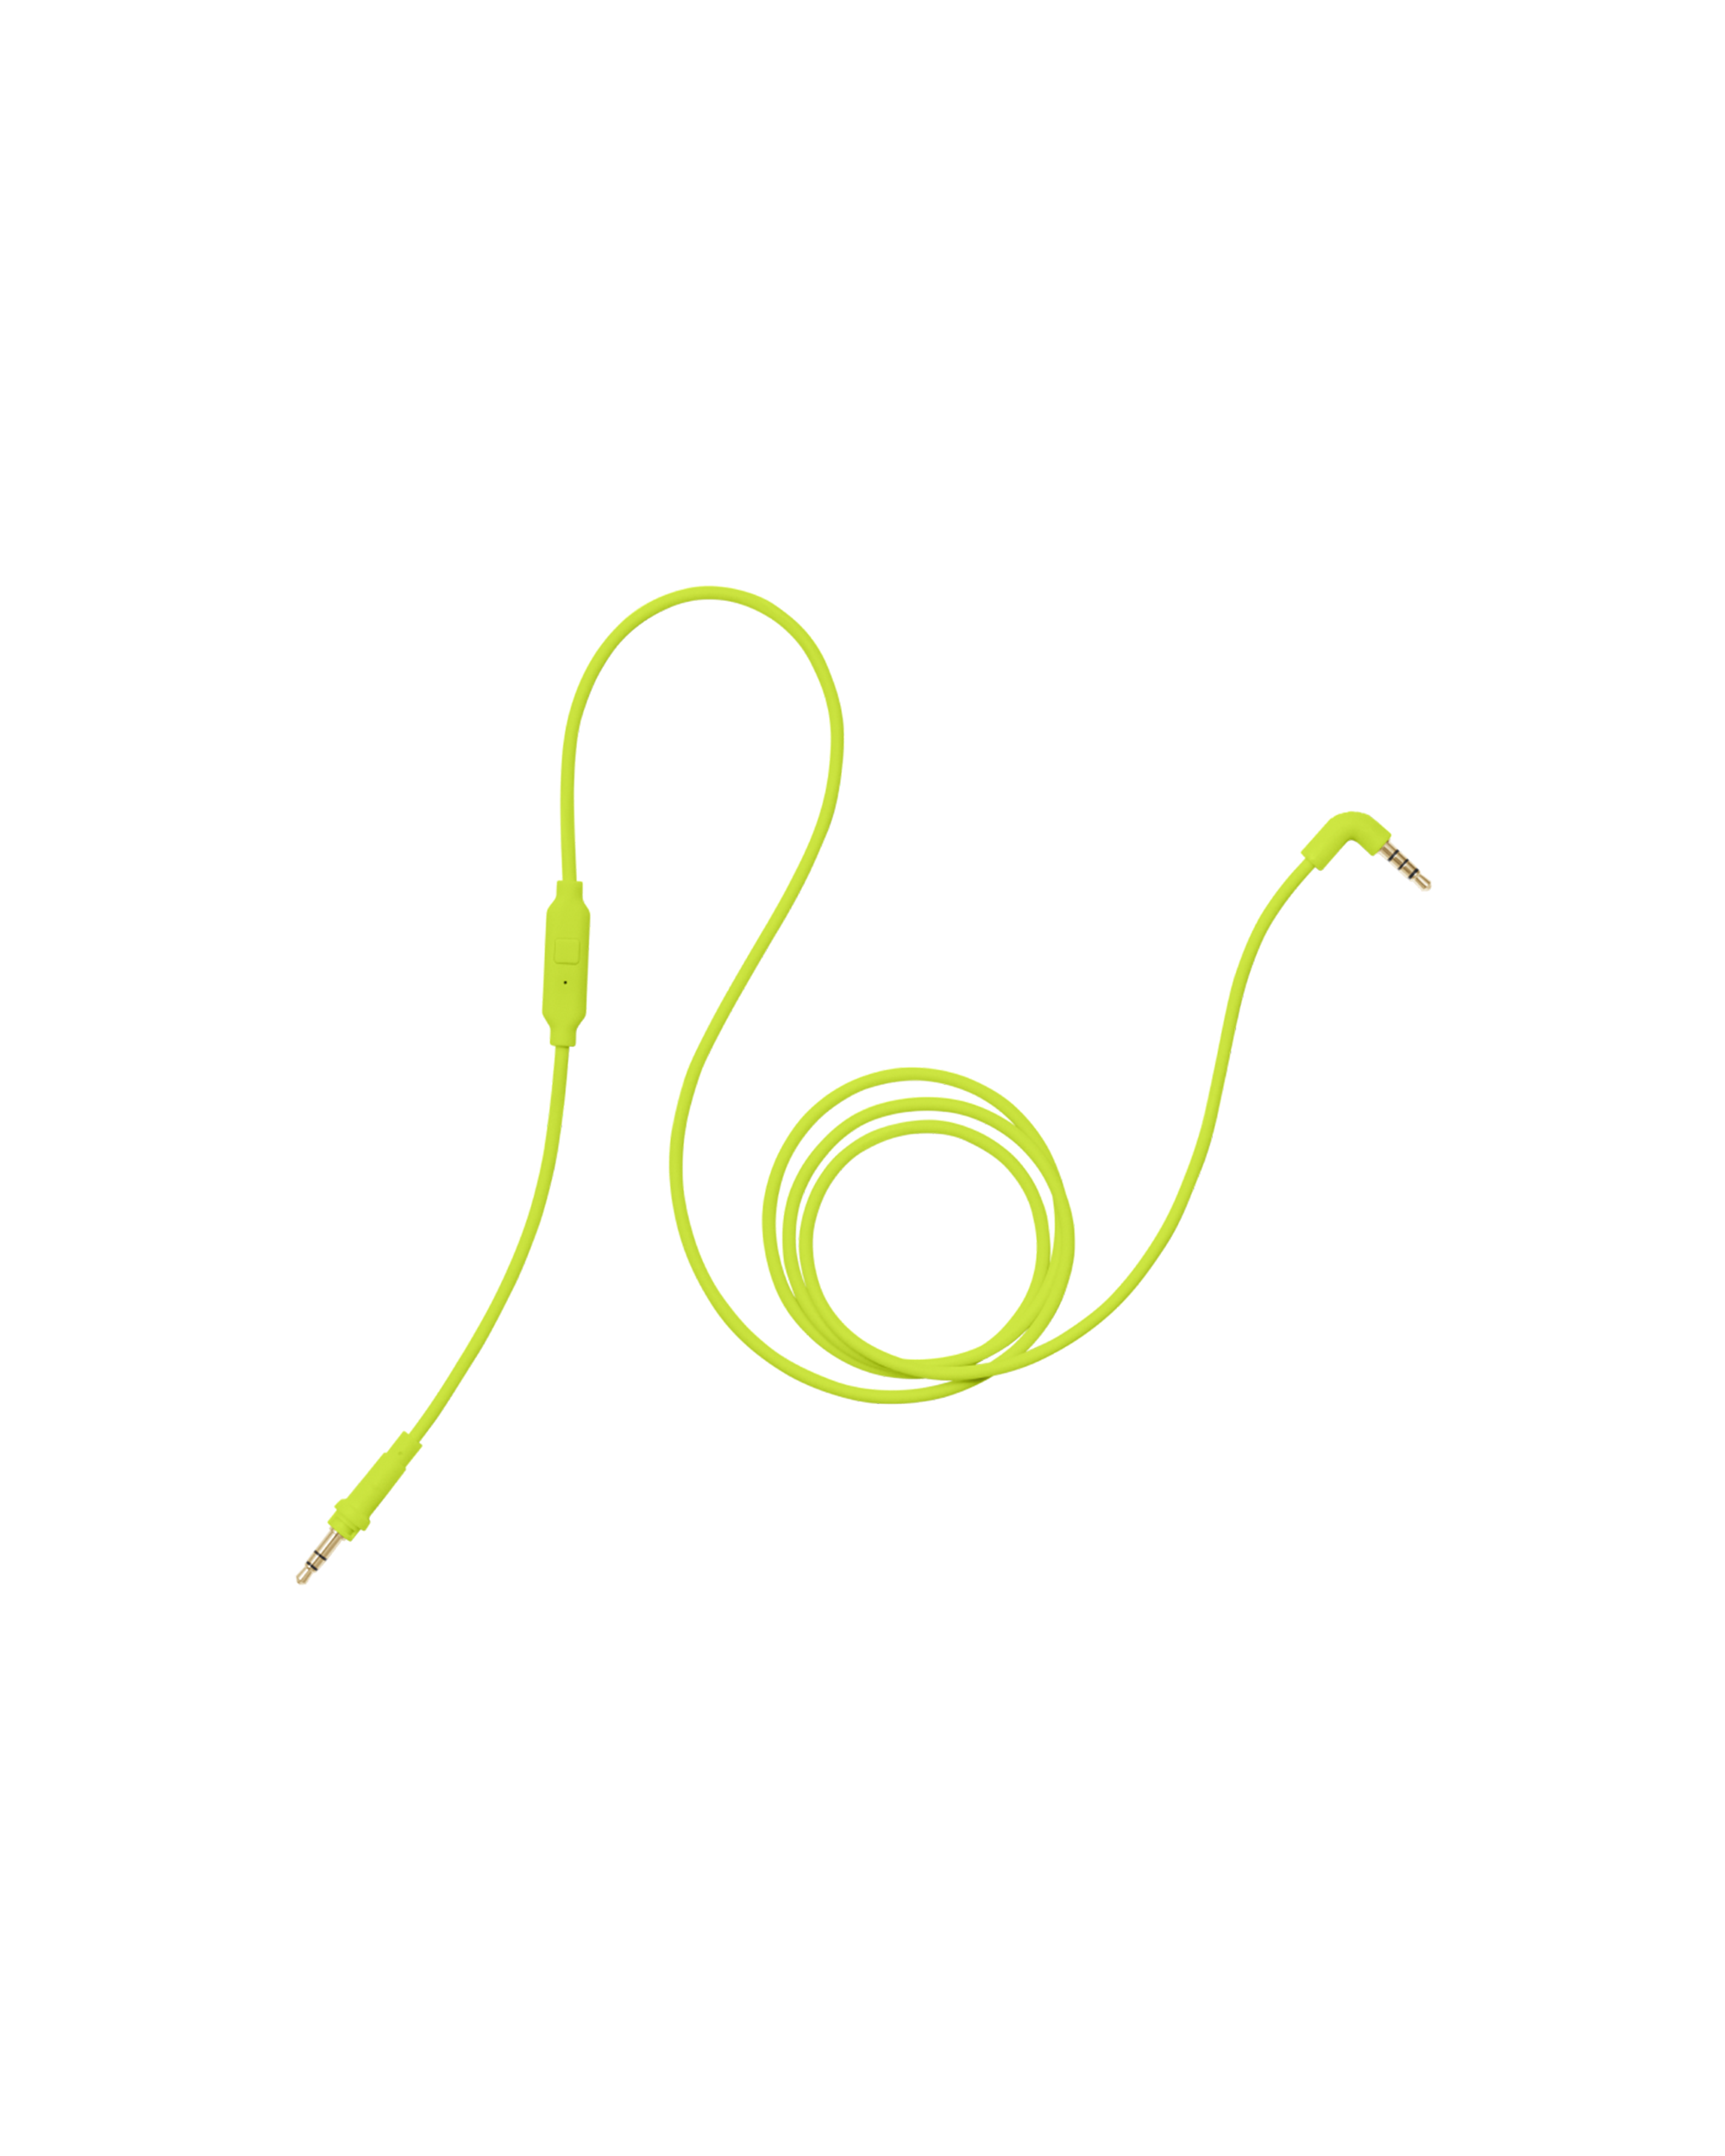 AIAIAI - C17 - Neon yellow straight cable - 1.2m